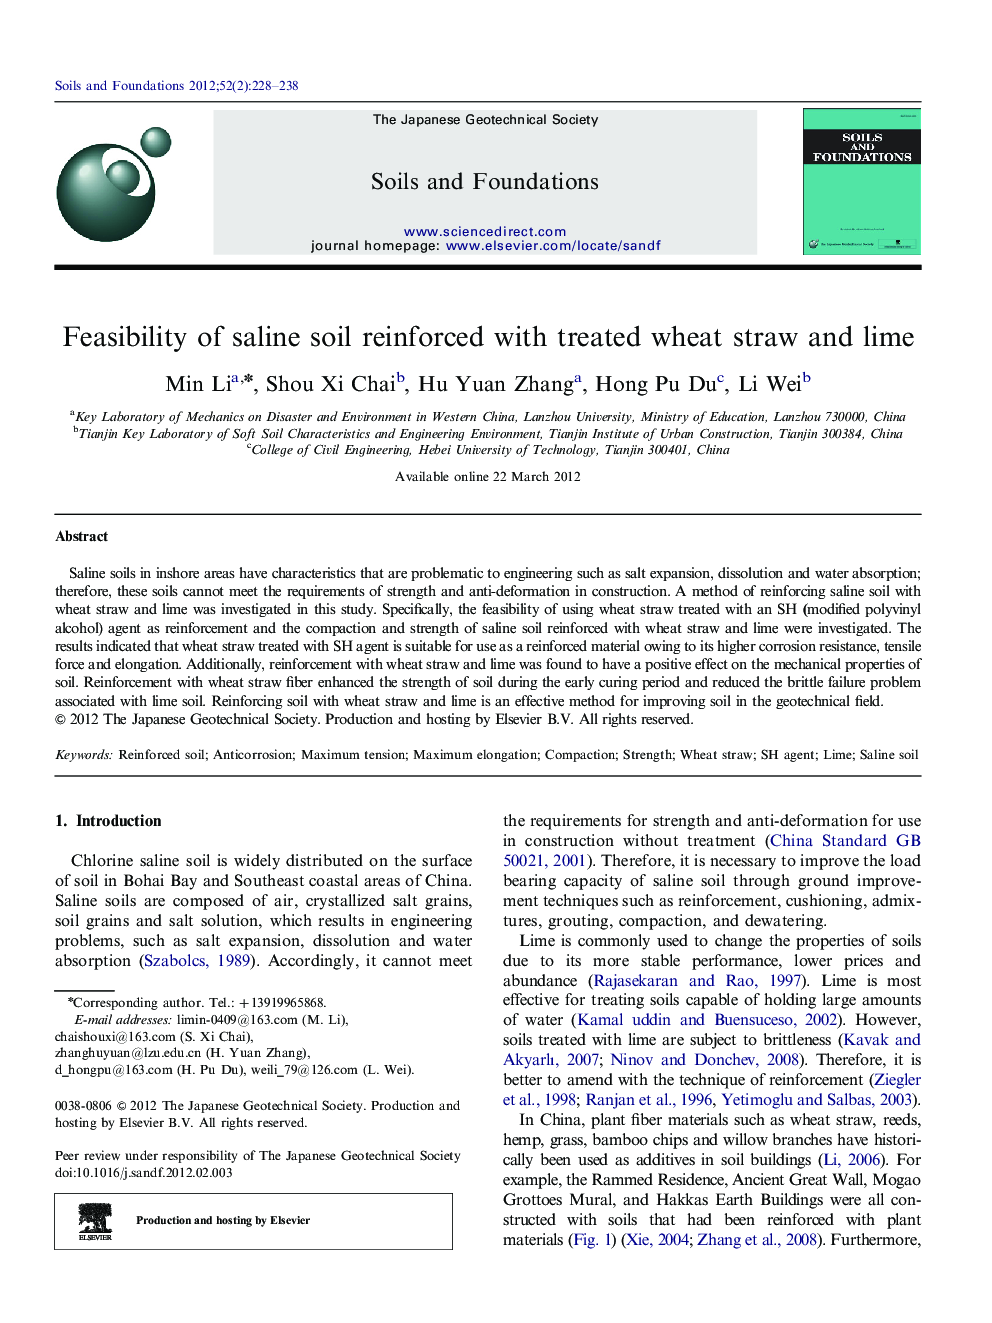 Feasibility of saline soil reinforced with treated wheat straw and lime